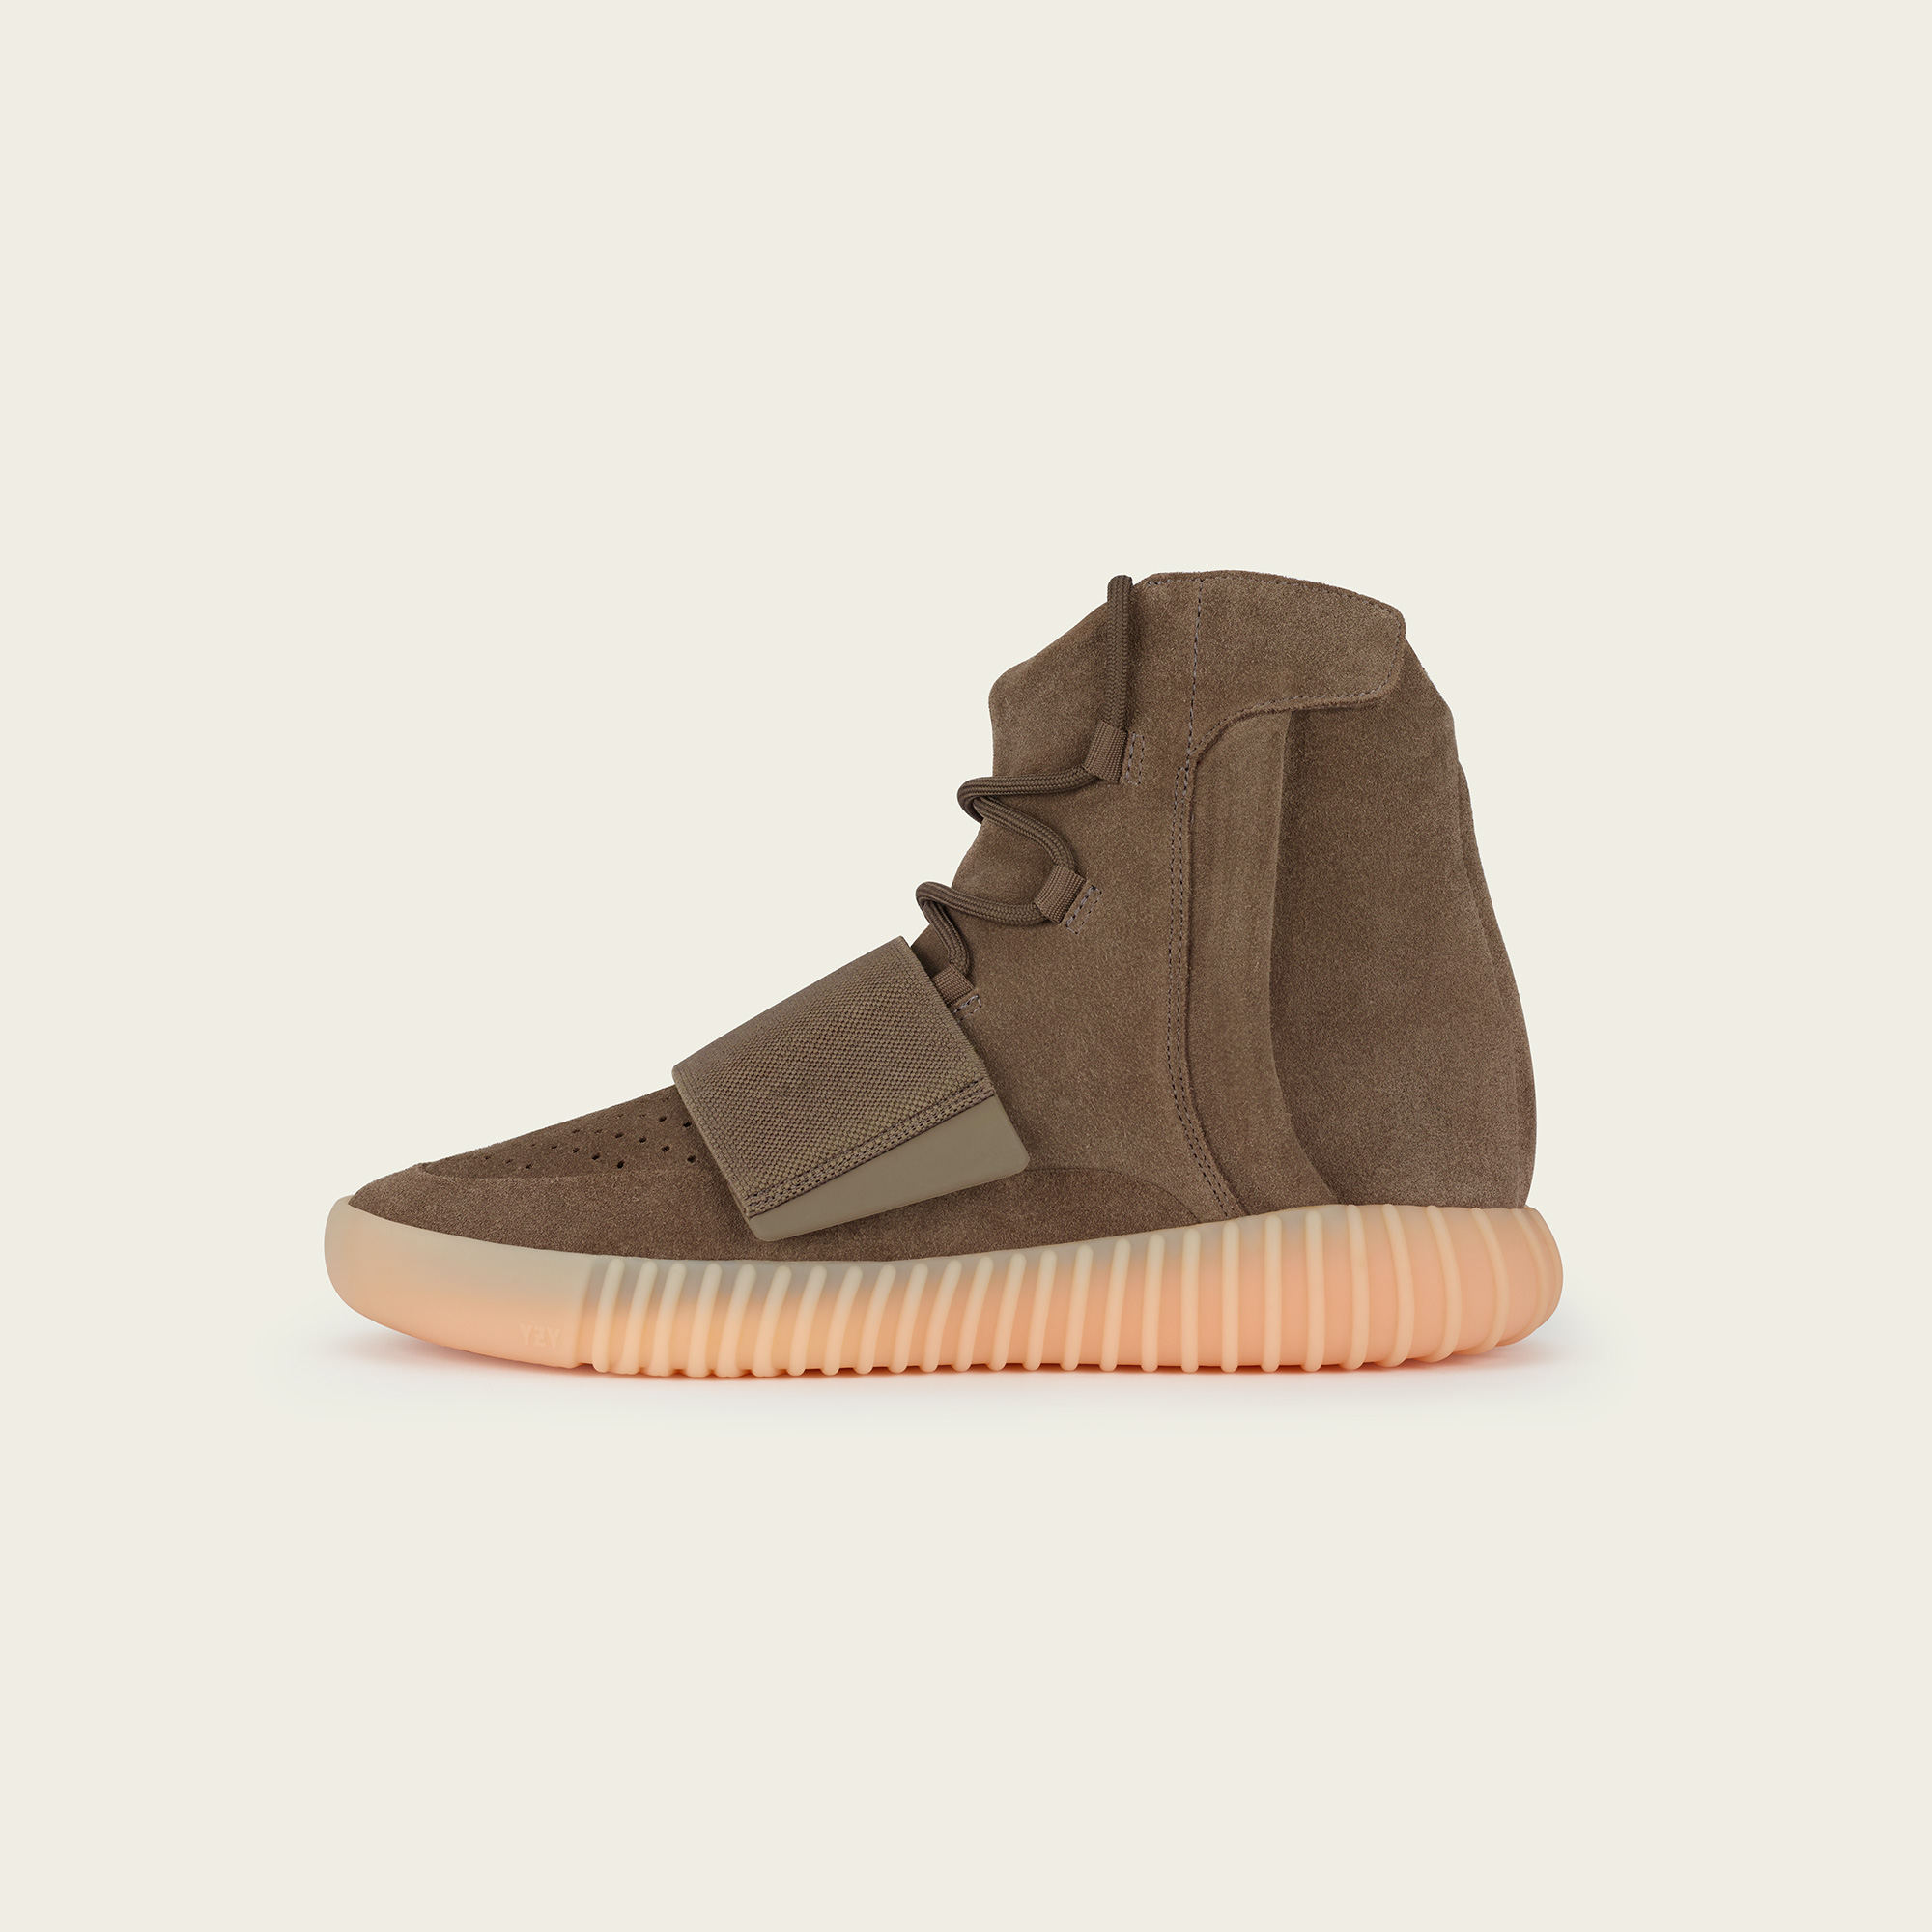 adidas-yeezy-boost-750-brown-4